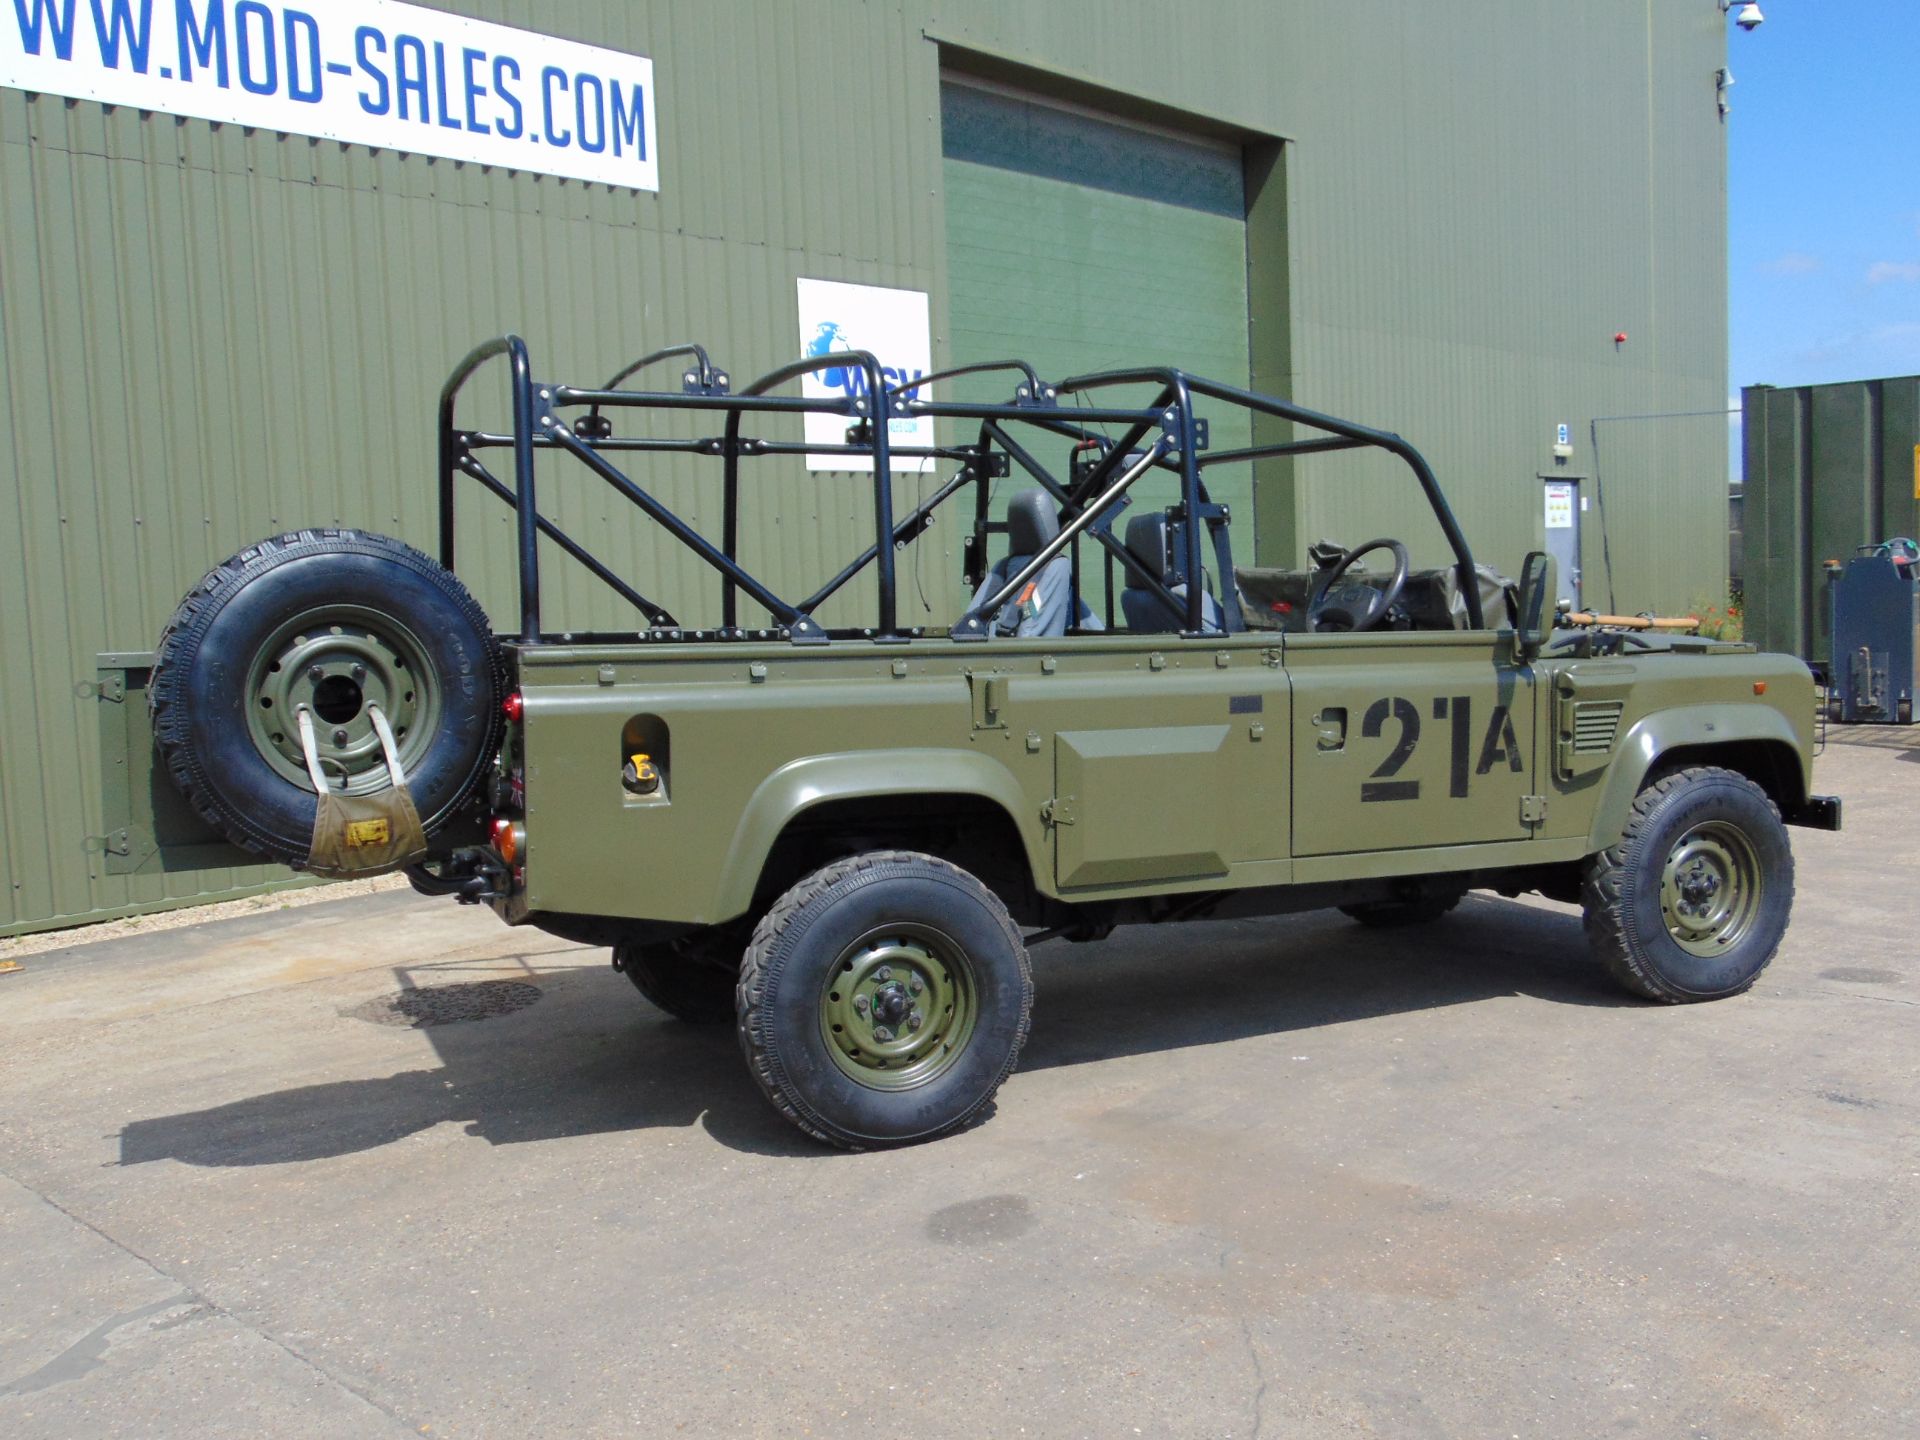 Land Rover Defender Wolf 110 Scout vehicle 300 Tdi - Image 30 of 37